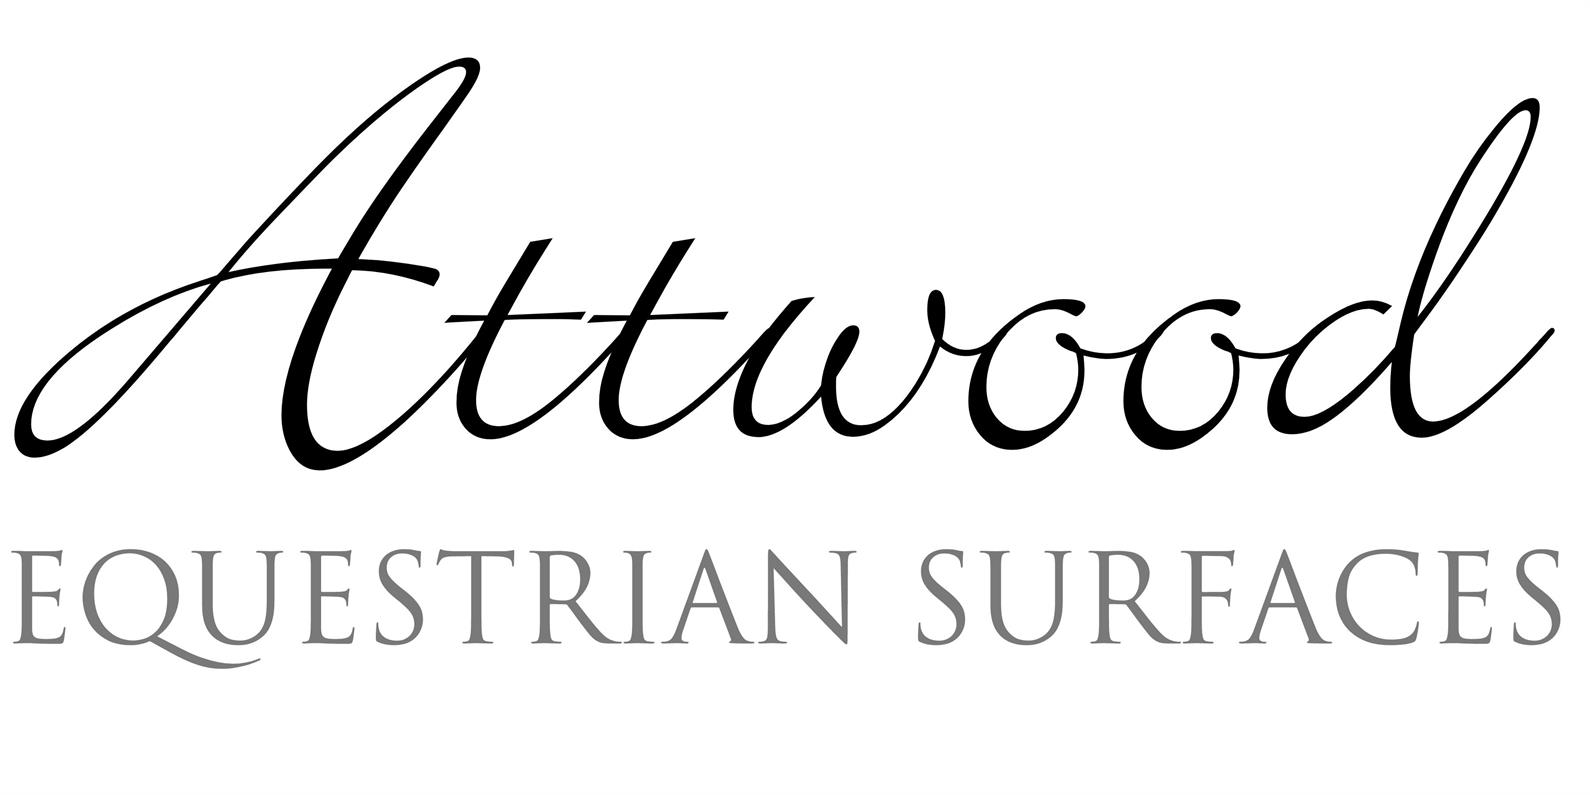 Attwood Equestrian Surfaces